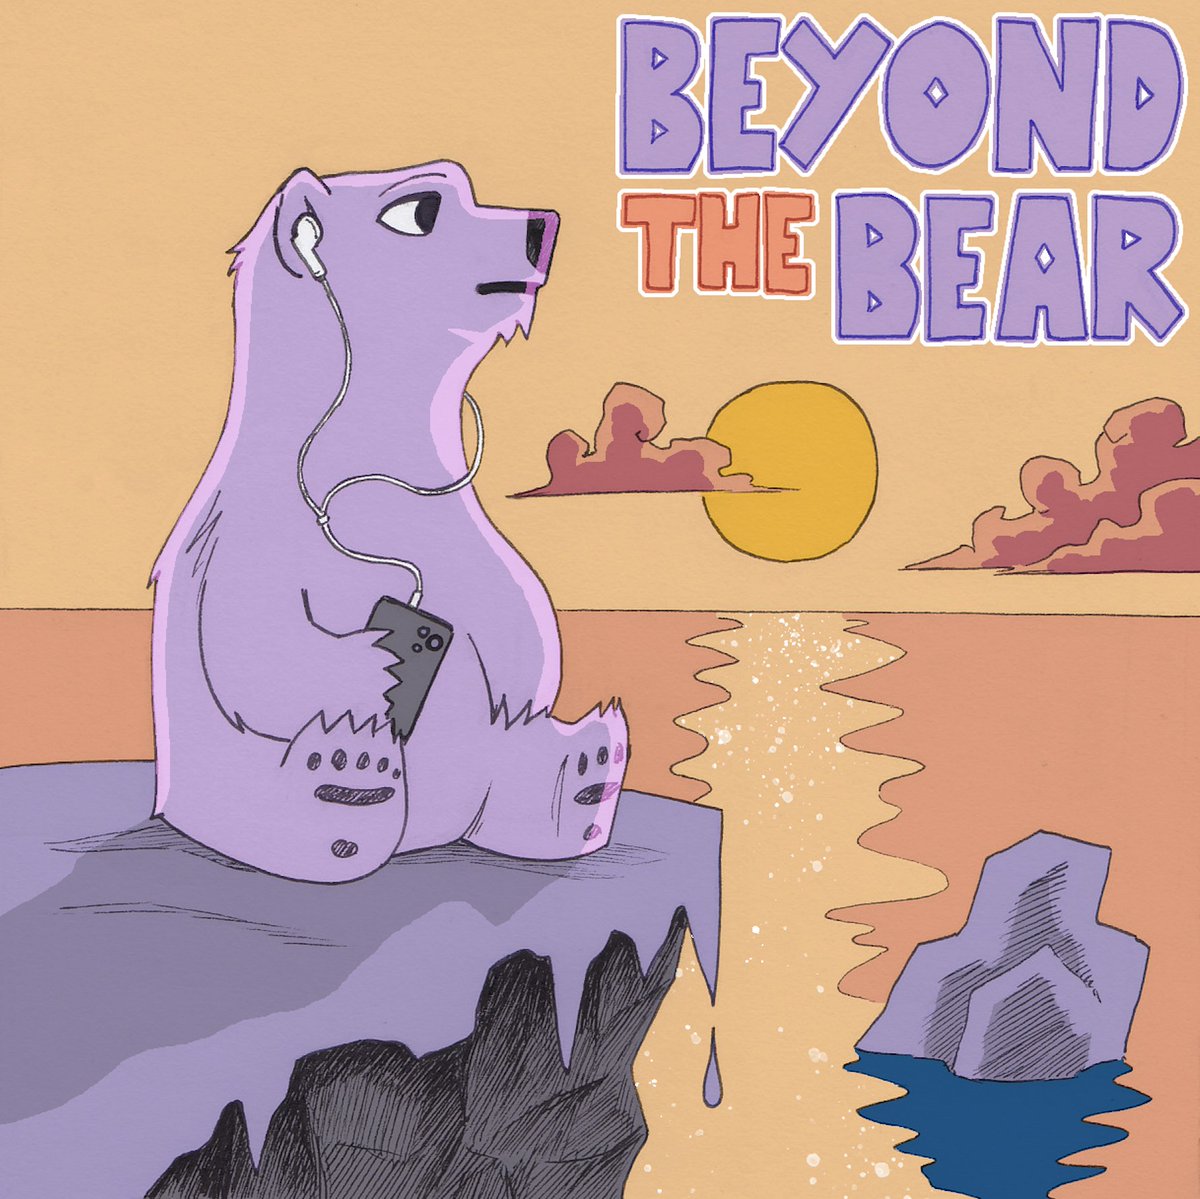 We’re excited to announce that our podcast Beyond The Bear will launch tomorrow! 🐻‍❄️ From COPs to carbon credits, we will be interviewing influential people from across the globe to explore under appreciated stories about the climate emergency 🕵️🔎 Stay tuned for more info! 👀